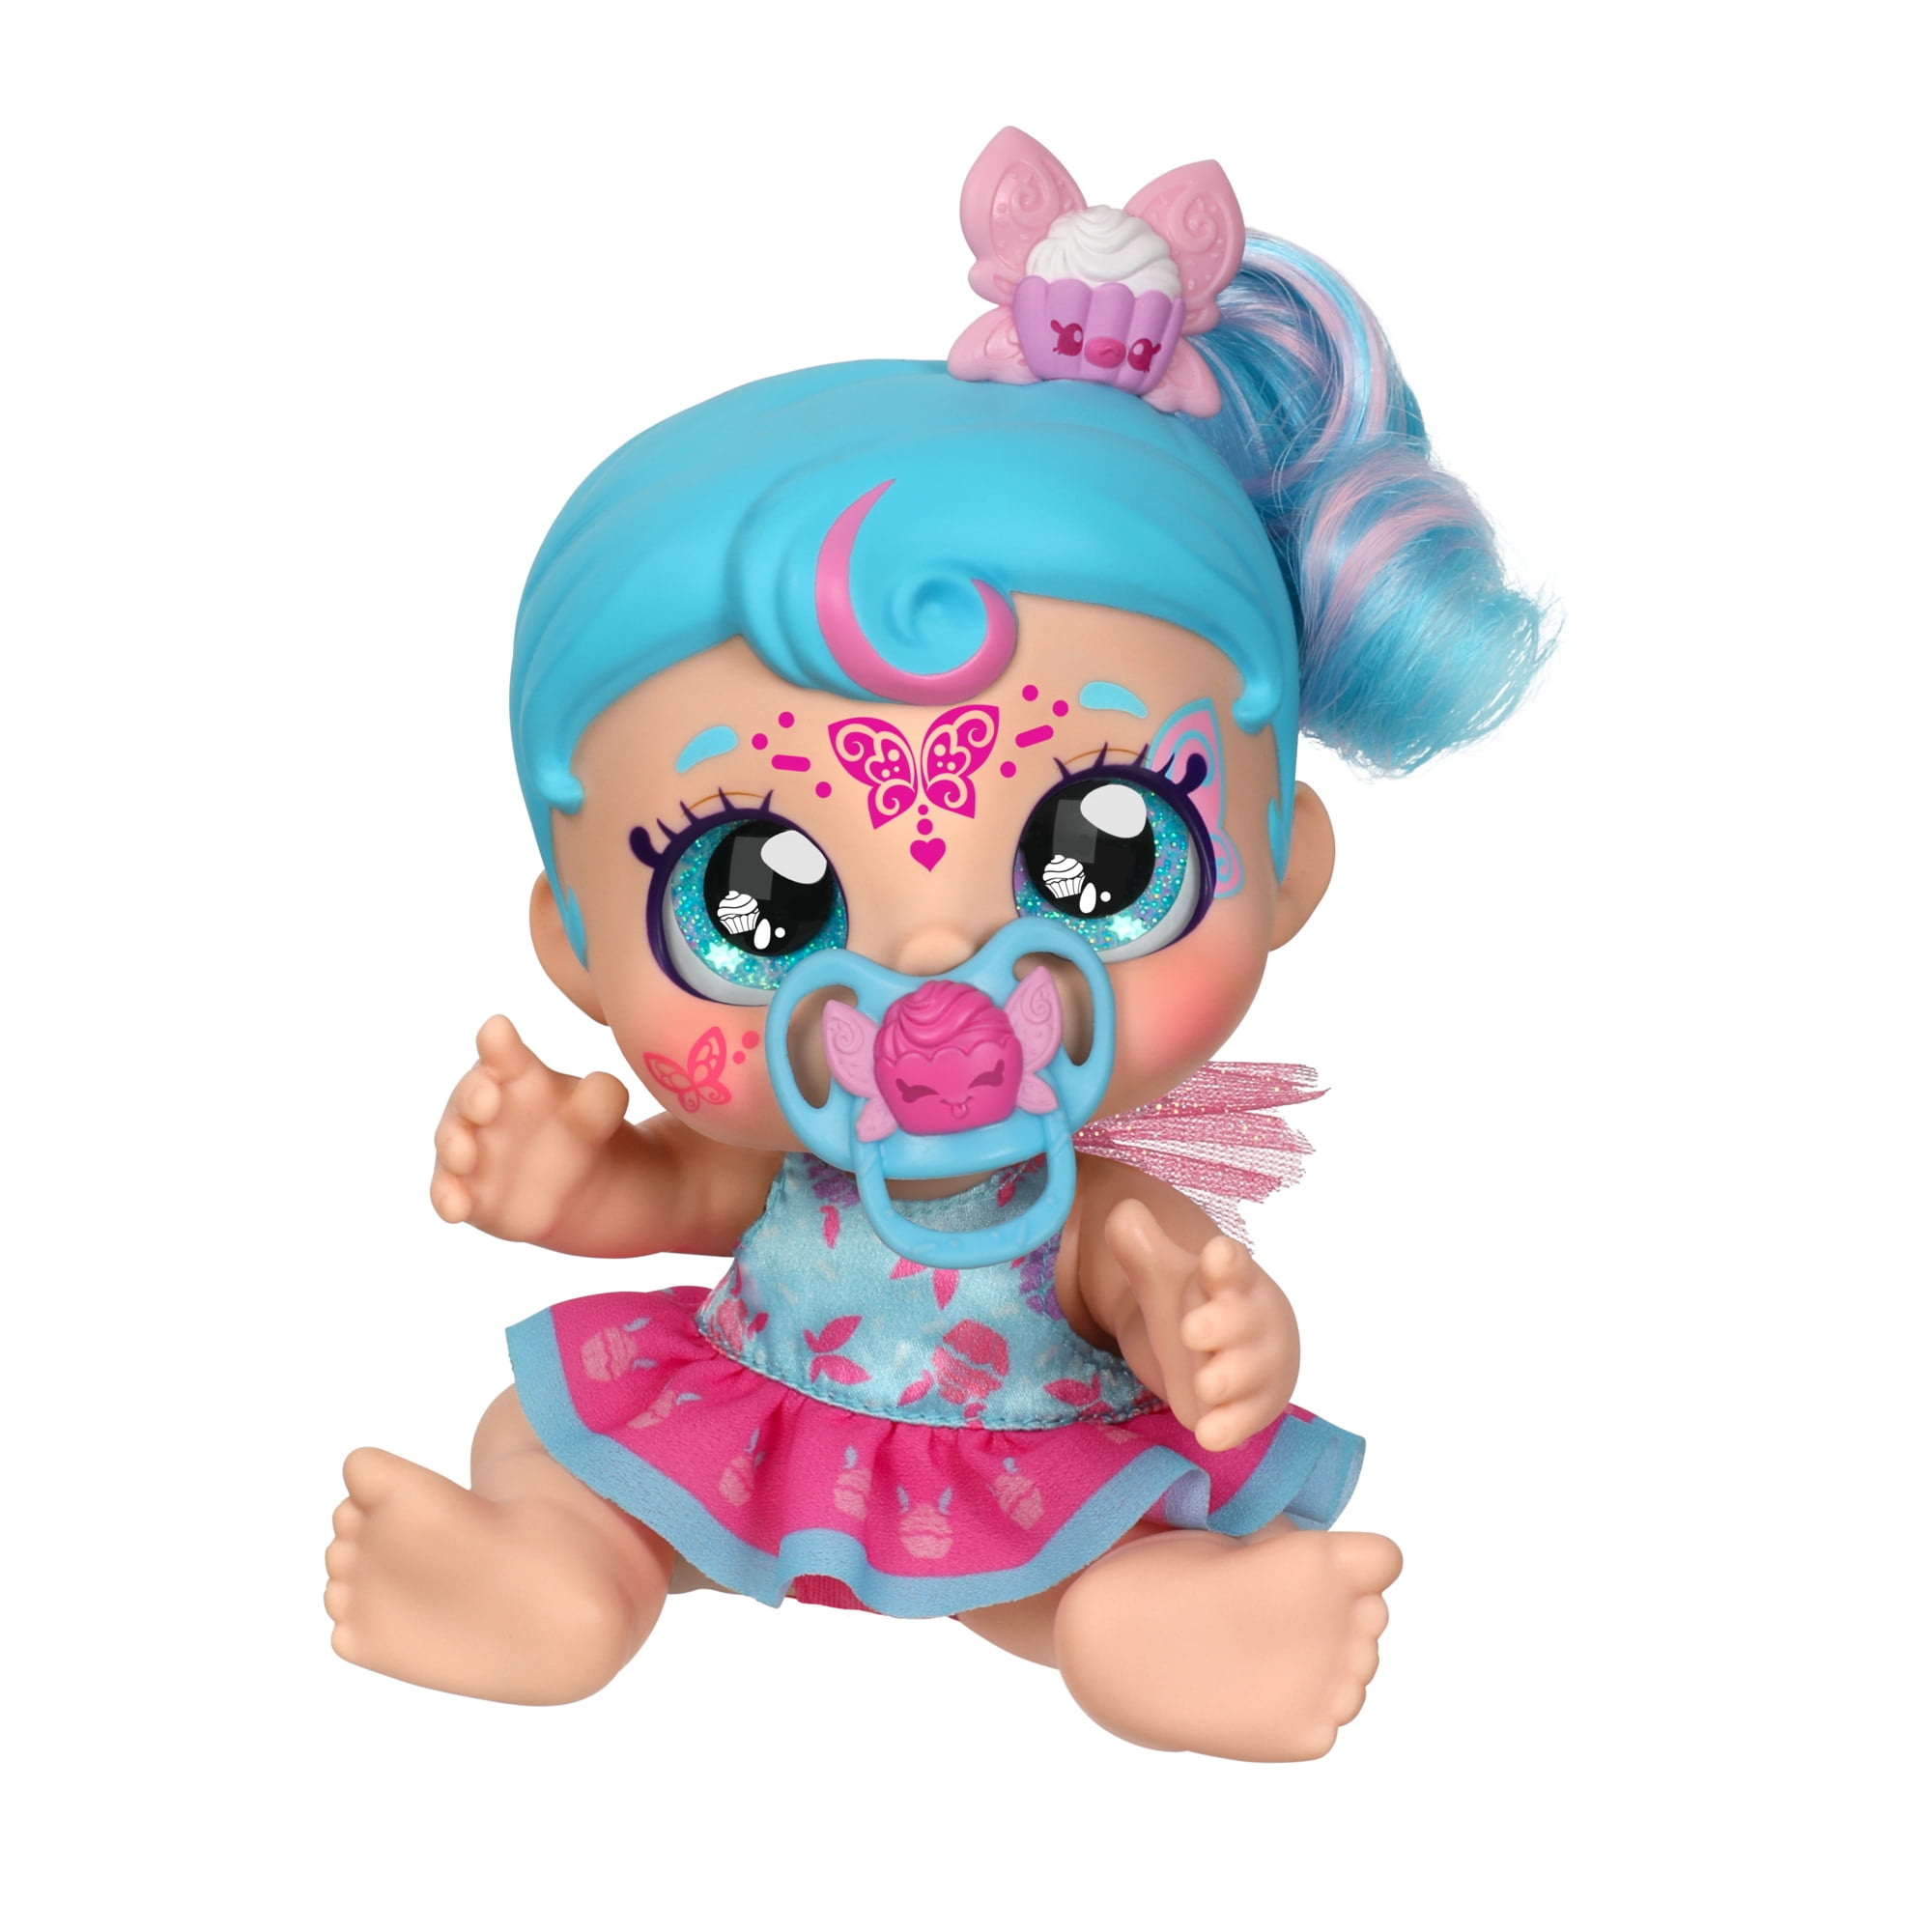 Kindi Kids Magic Baby Sister Doll Patticake Fairy with Face Paint Reveal, Girls, Ages 3 +